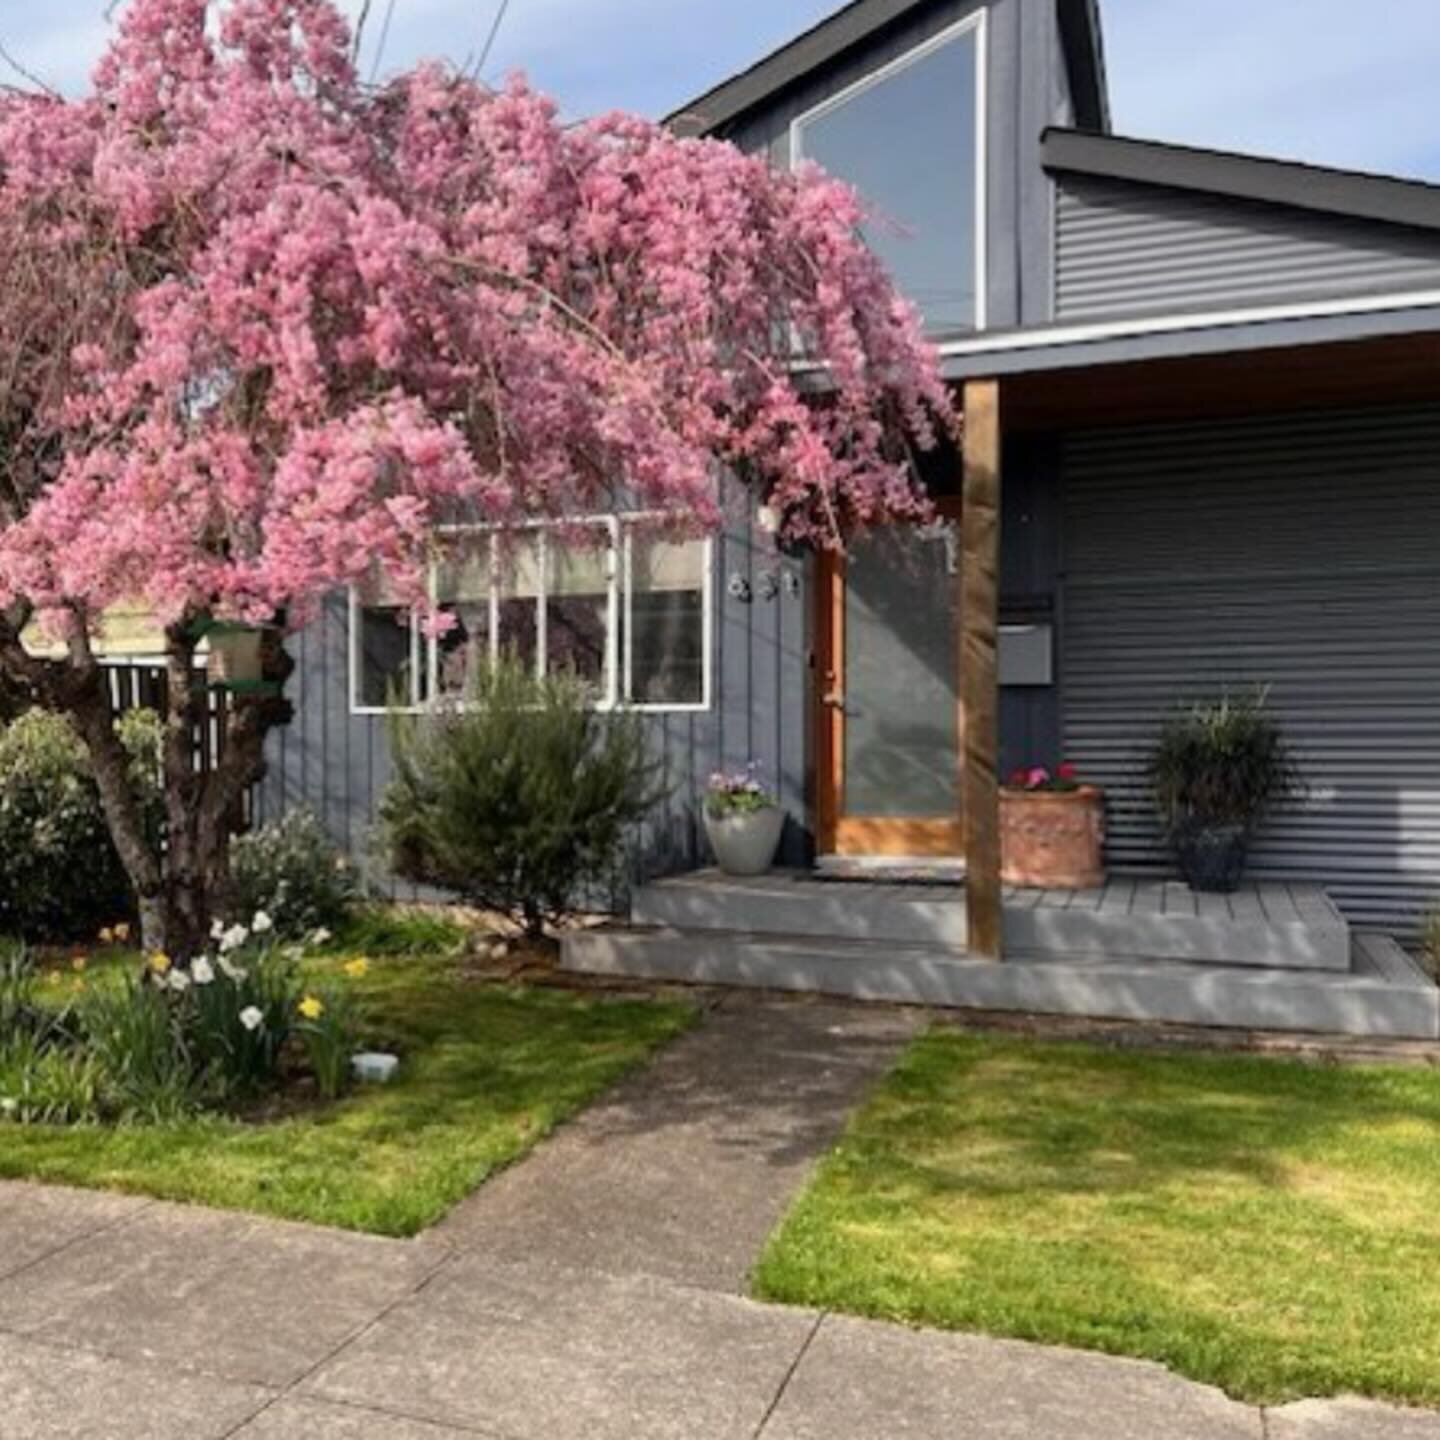 Here&rsquo;s a modern fairytale &mdash; a Ghibli tree in front, theatrical hot tub scene in back, and all the sun and cozy updates inside. 

Message me to go see it! 

3 bed | 2 bath | 1,313 sq ft | $575,000

Listing courtesy: Jessica Radke, Property